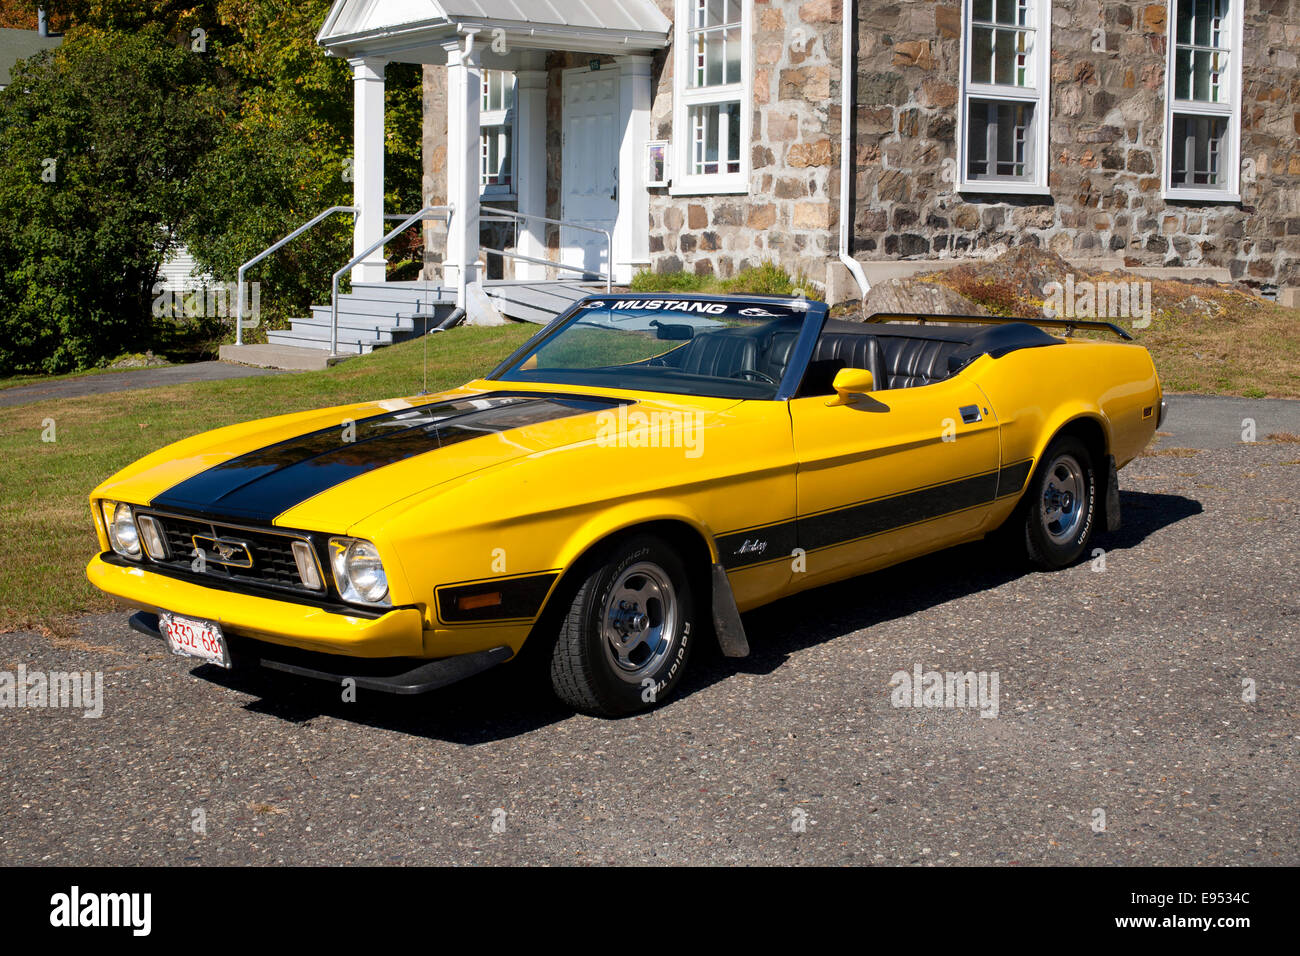 1973 Ford Mustang Convertible, Roxton Pond, Quebec, Canada Stock Photo